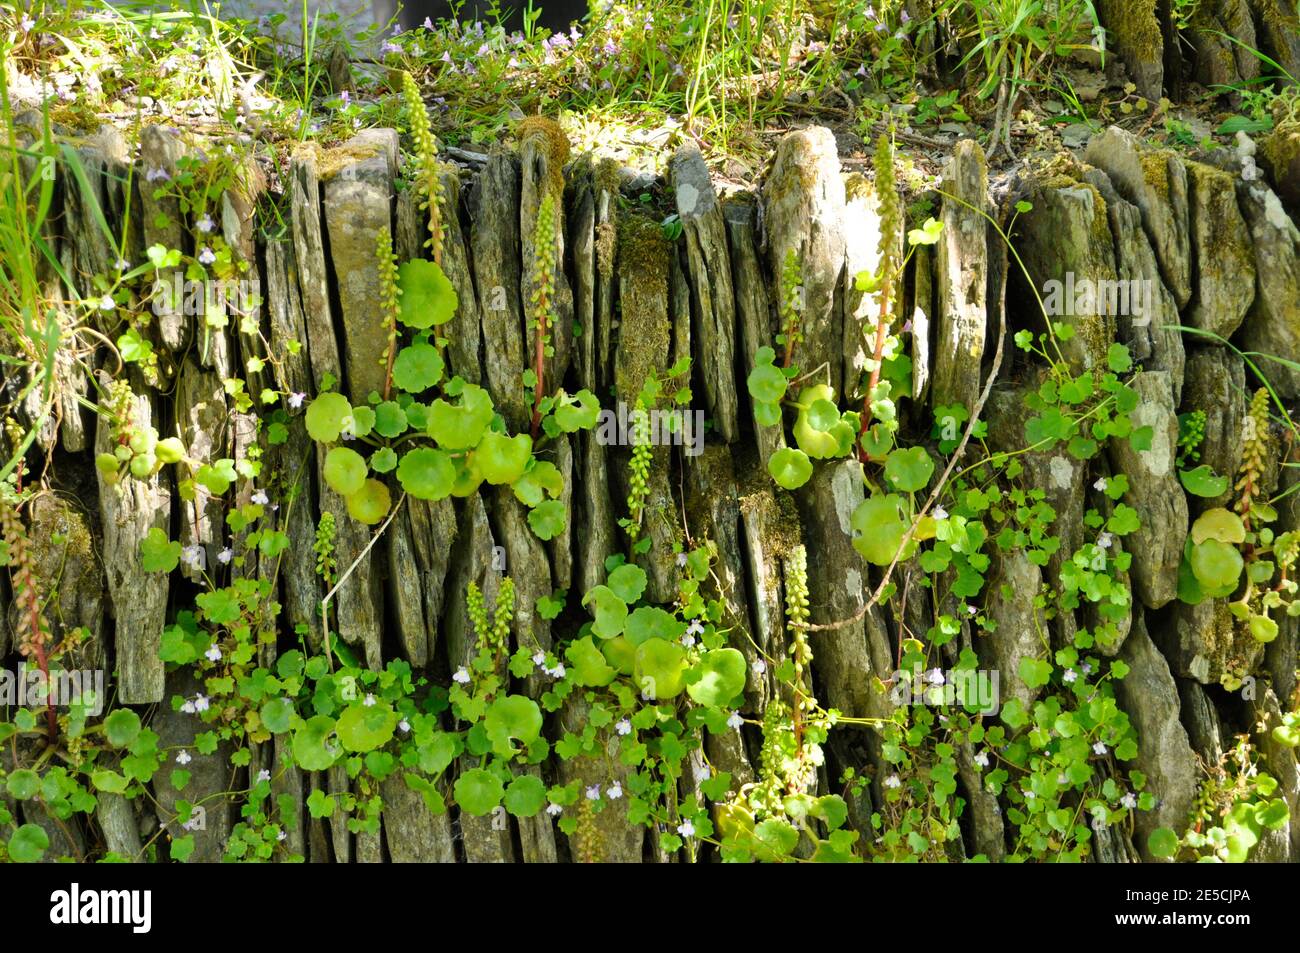 Stone wall laid in vertical courses covered with navelwort (Umbilicus rupestris) and ivy-leaved toadflax (Cymbalaria muralis) on the edge of Exmoor,So Stock Photo